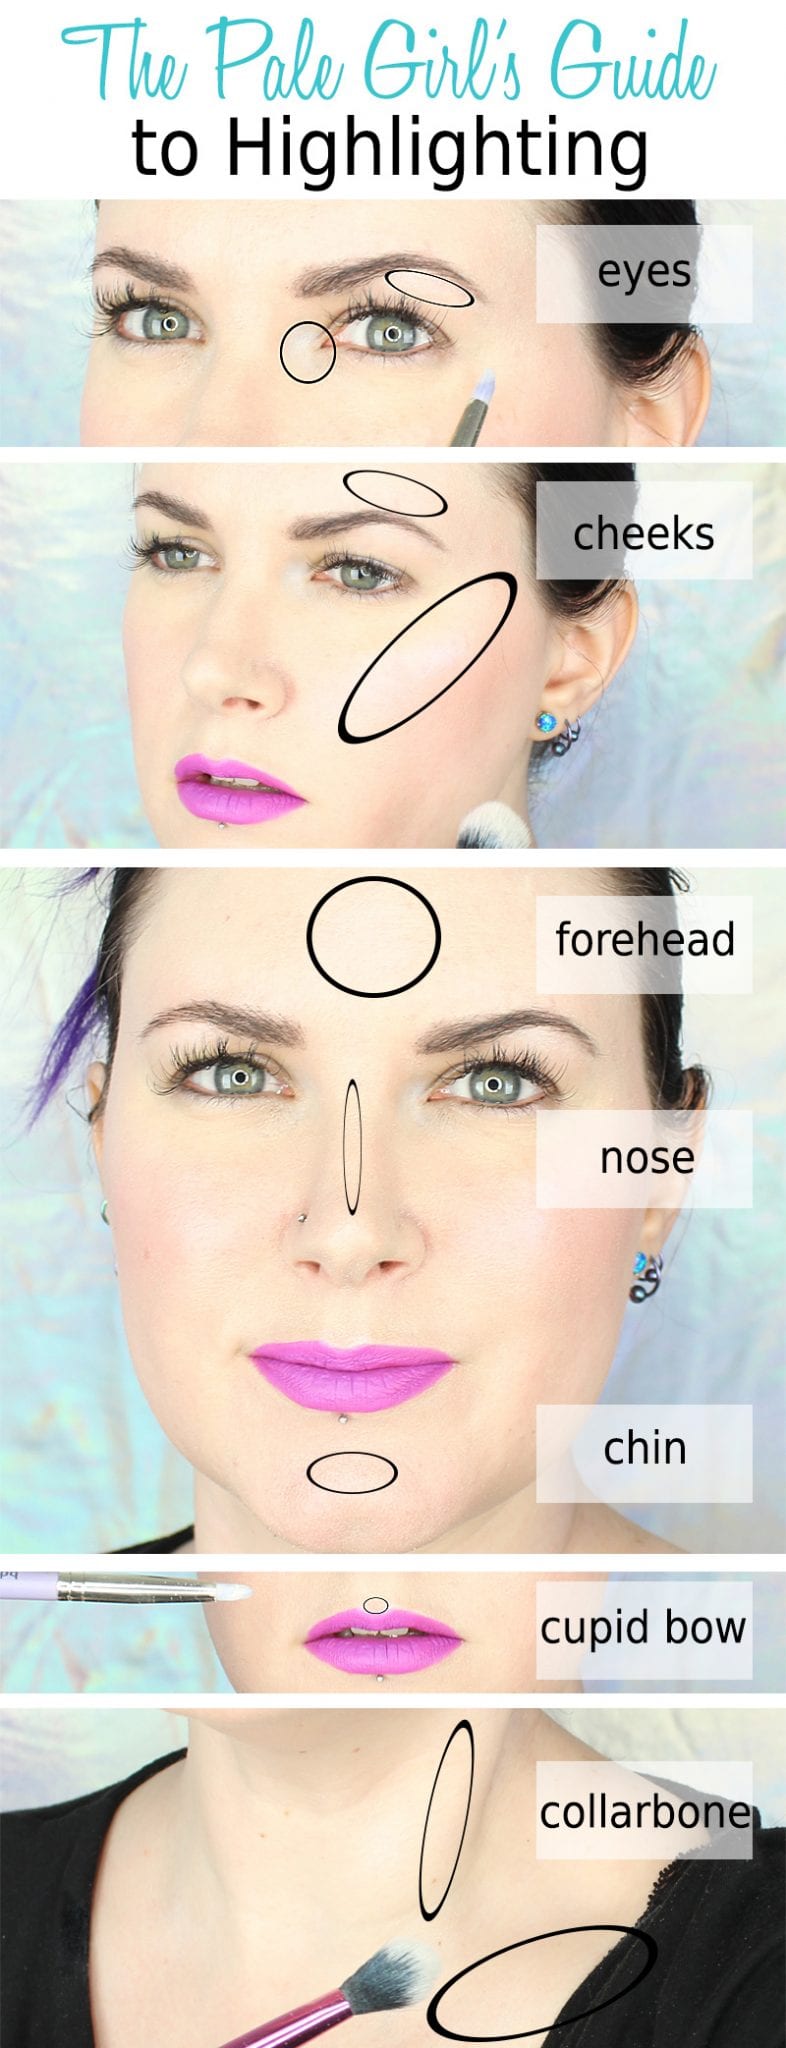 The Pale Girl's Guide to Highlighting